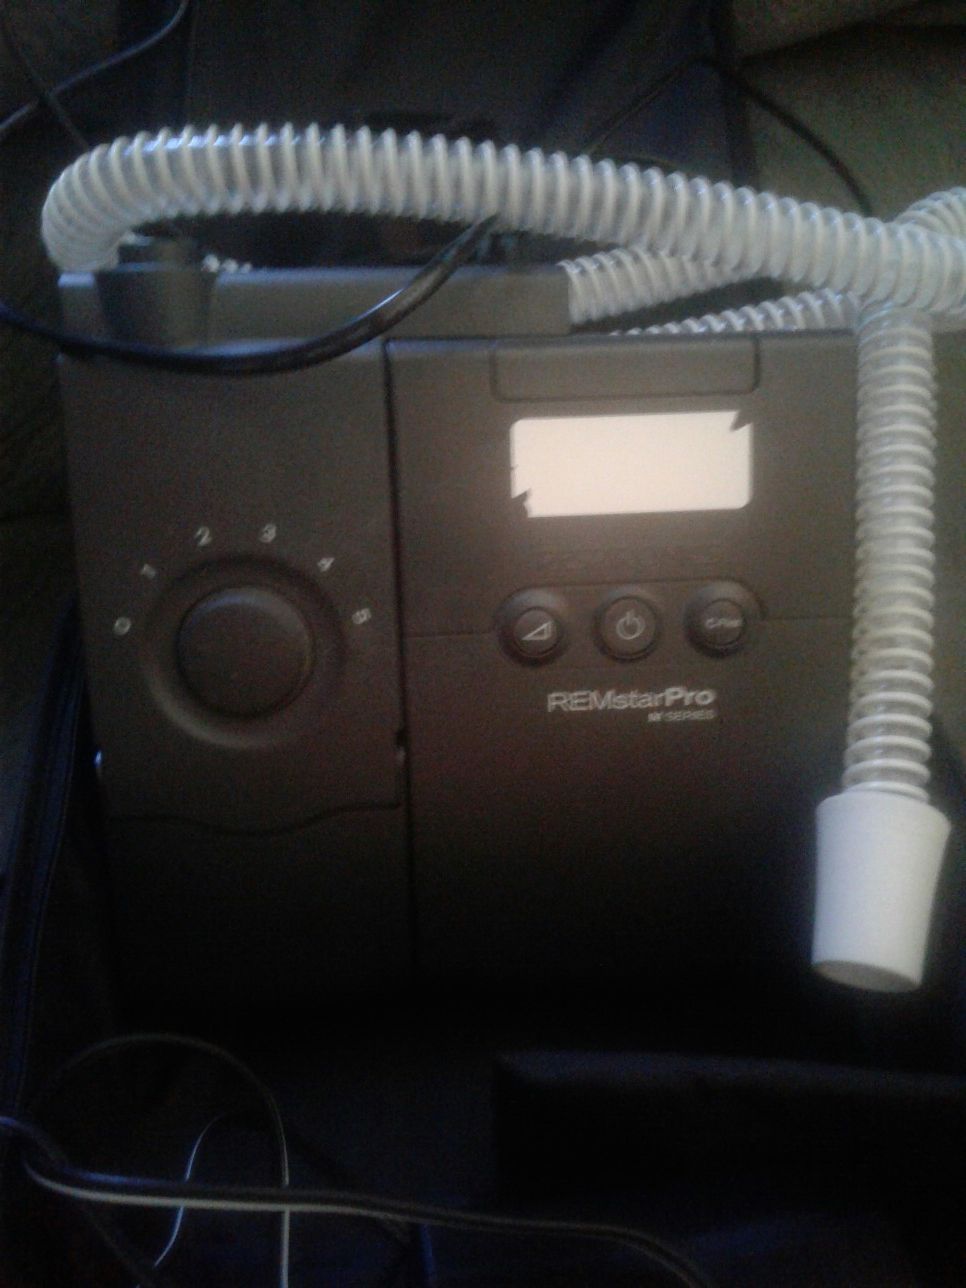 Rempro cpap in great shape